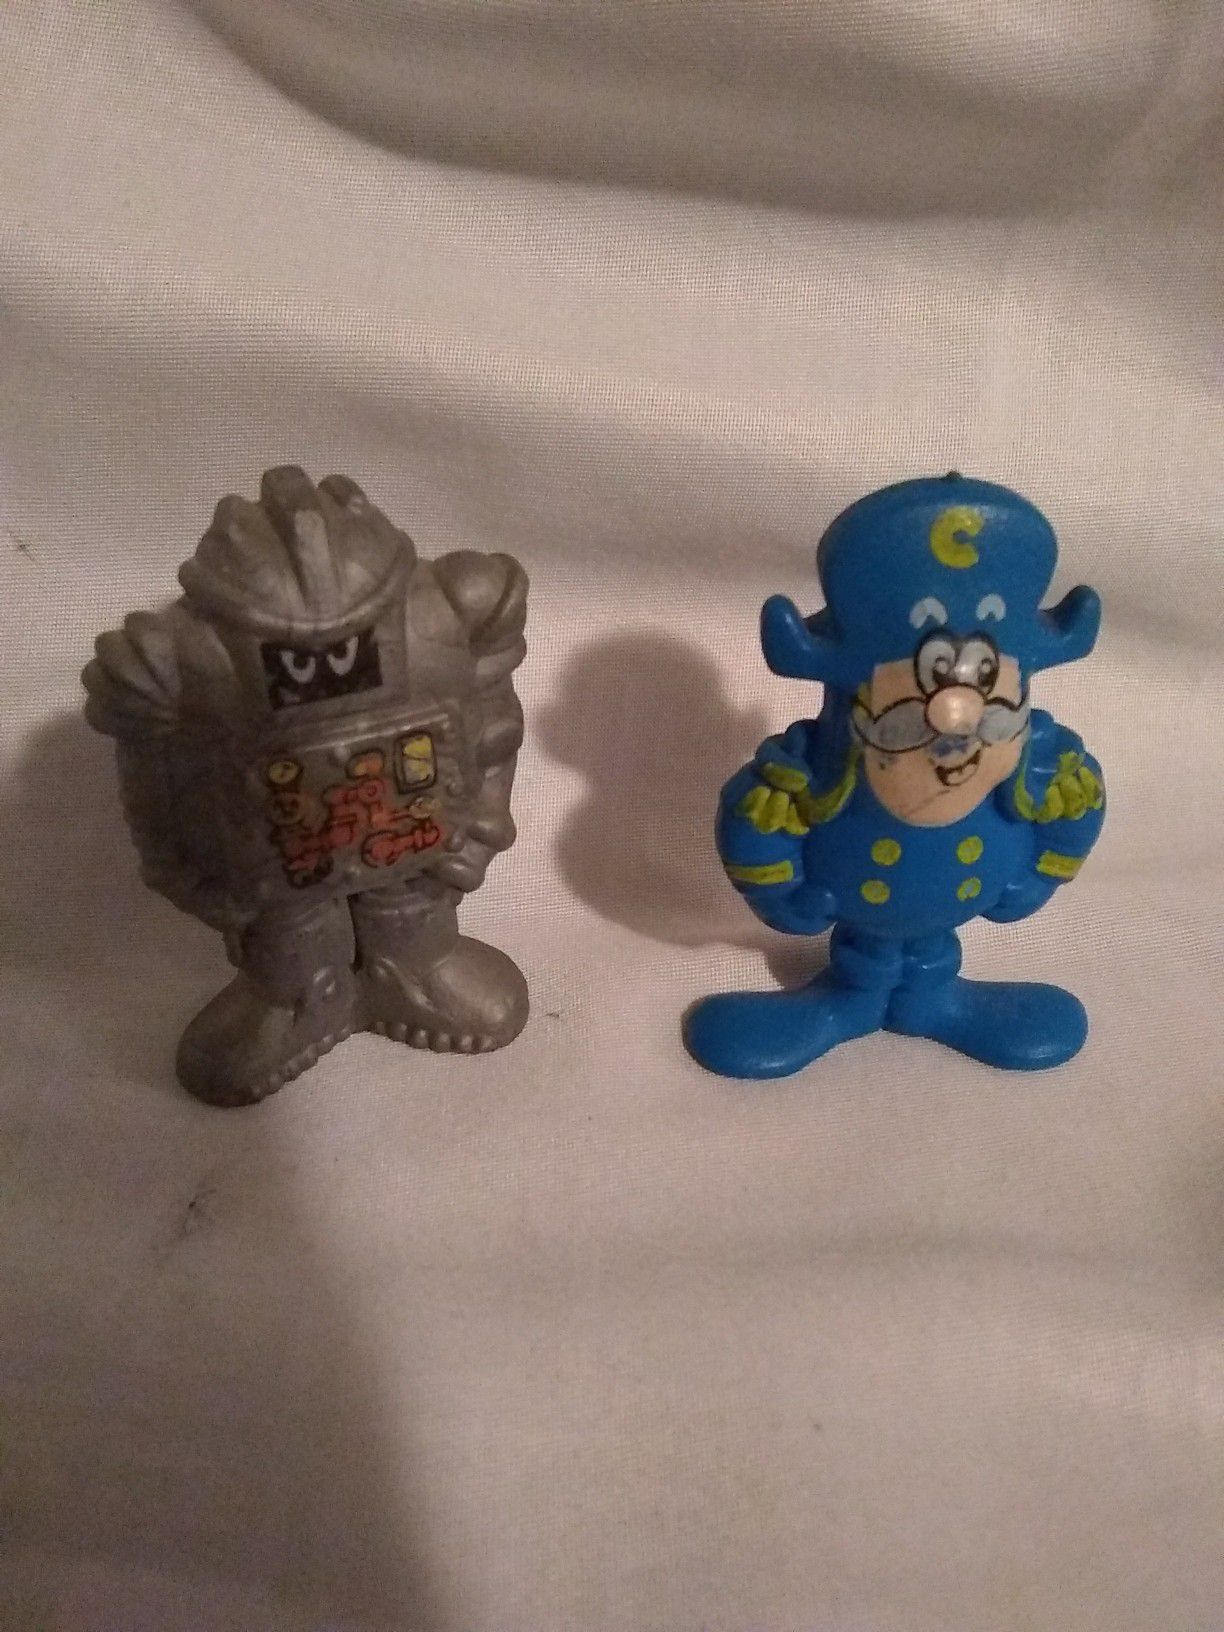 Robot and Captain Crunch toys 1986